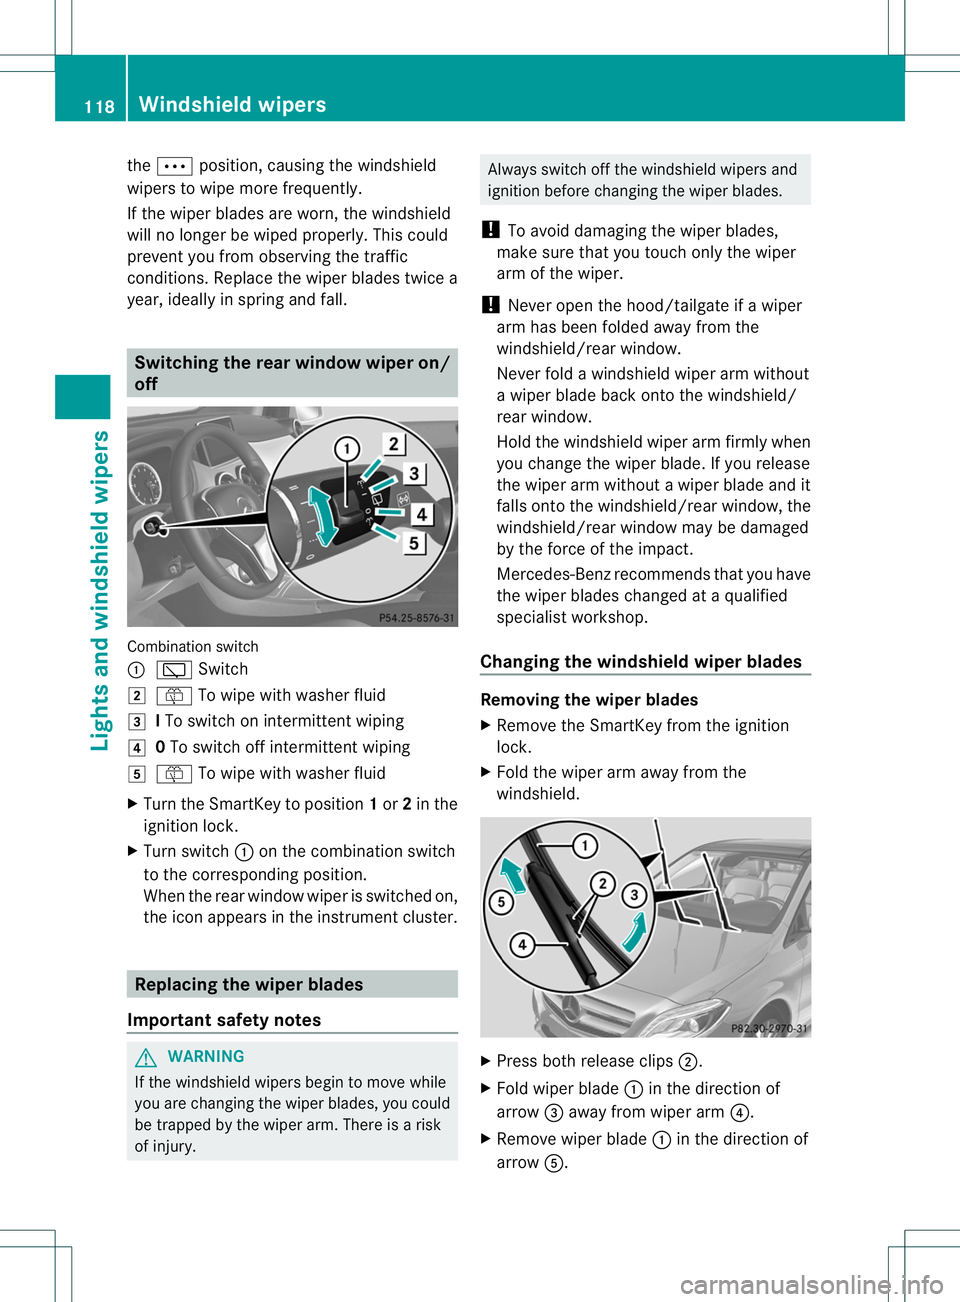 MERCEDES-BENZ B-CLASS SPORTS 2014  Owners Manual the
0002 position, causing the windshield
wipers to wipe mor efrequently.
If the wipe rblades are worn ,the windshield
will no longer be wiped properly. This could
prevent you fro mobservin gthe traff